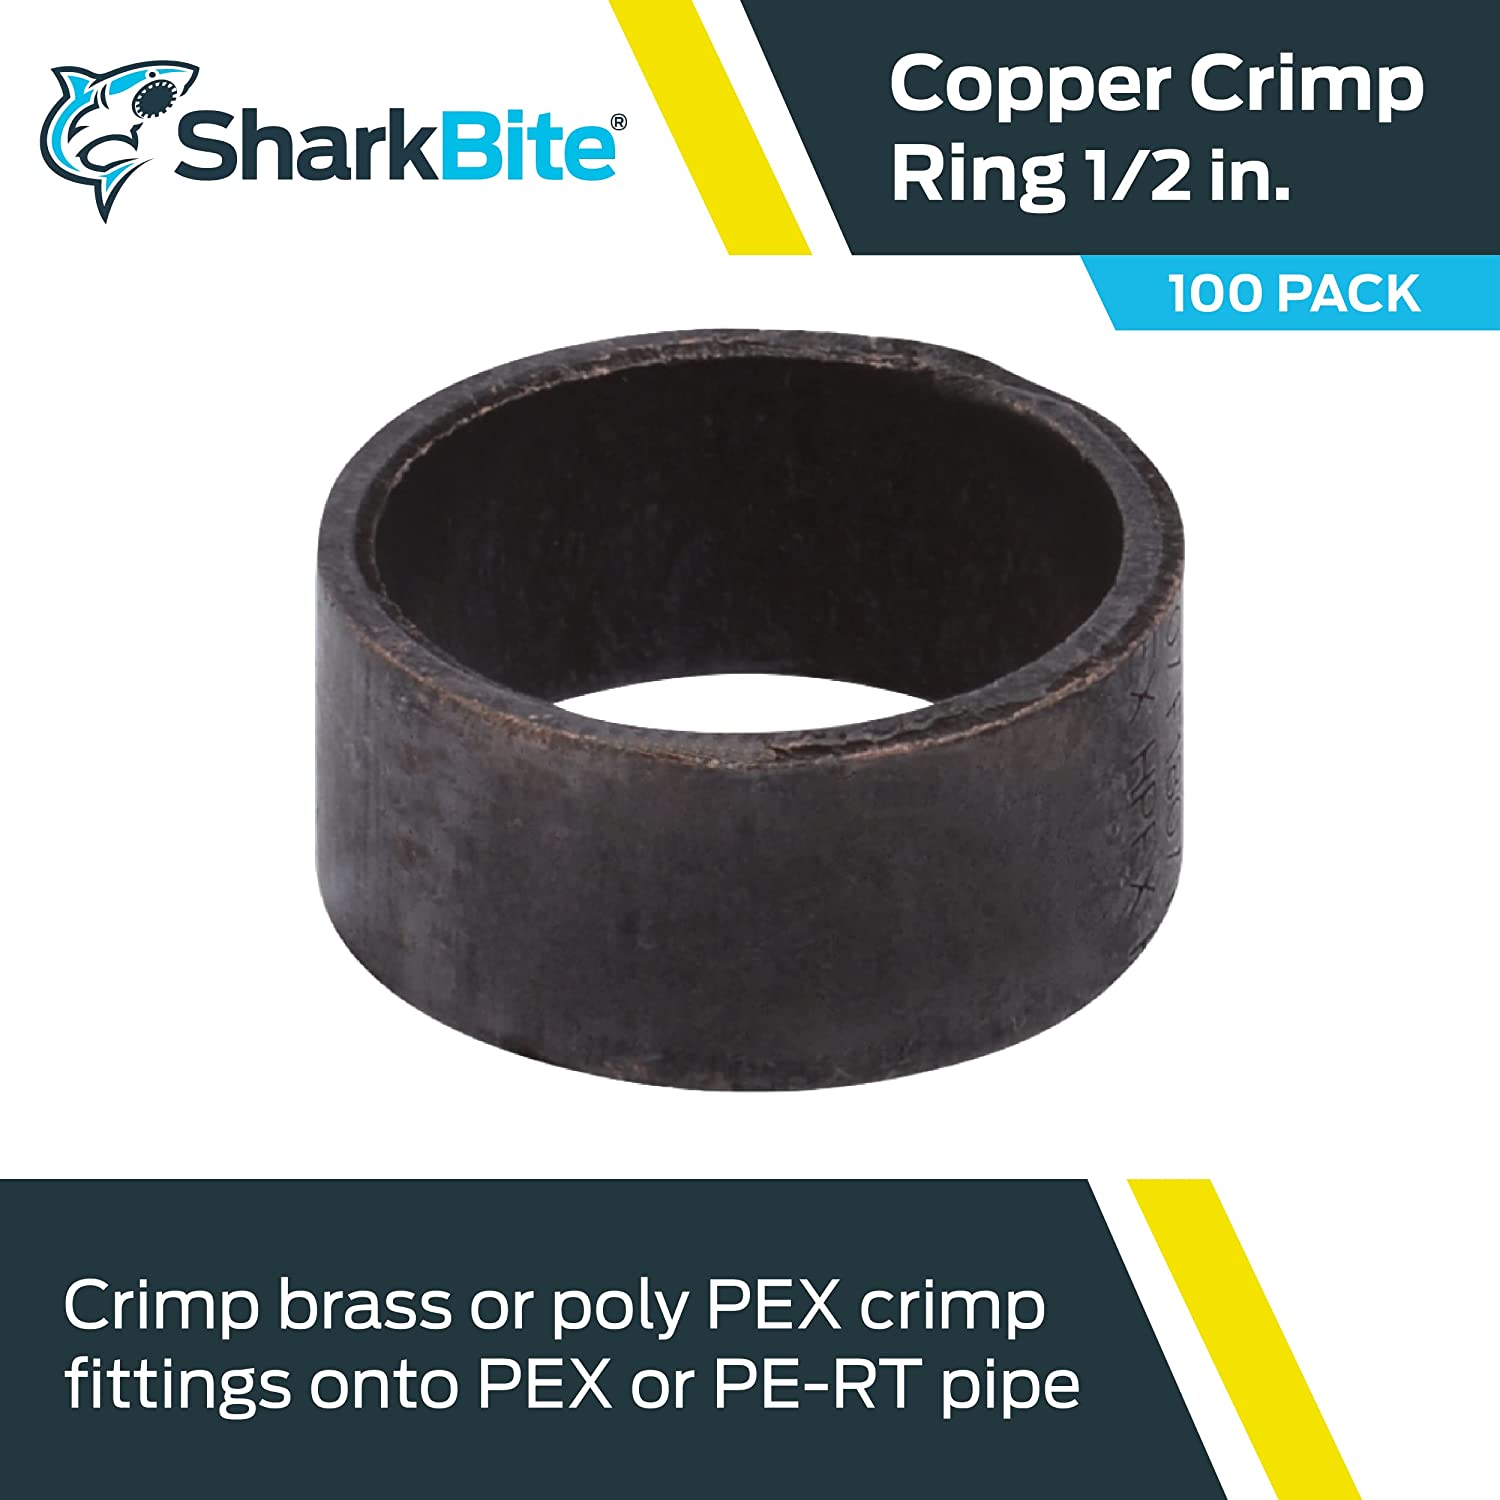 SharkBite PEX Pipe Crimp Ring 1/2 Inch, Plumbing Fittings, Pack of 100, 23102CP100, 1/2-Inch, - image 2 of 6